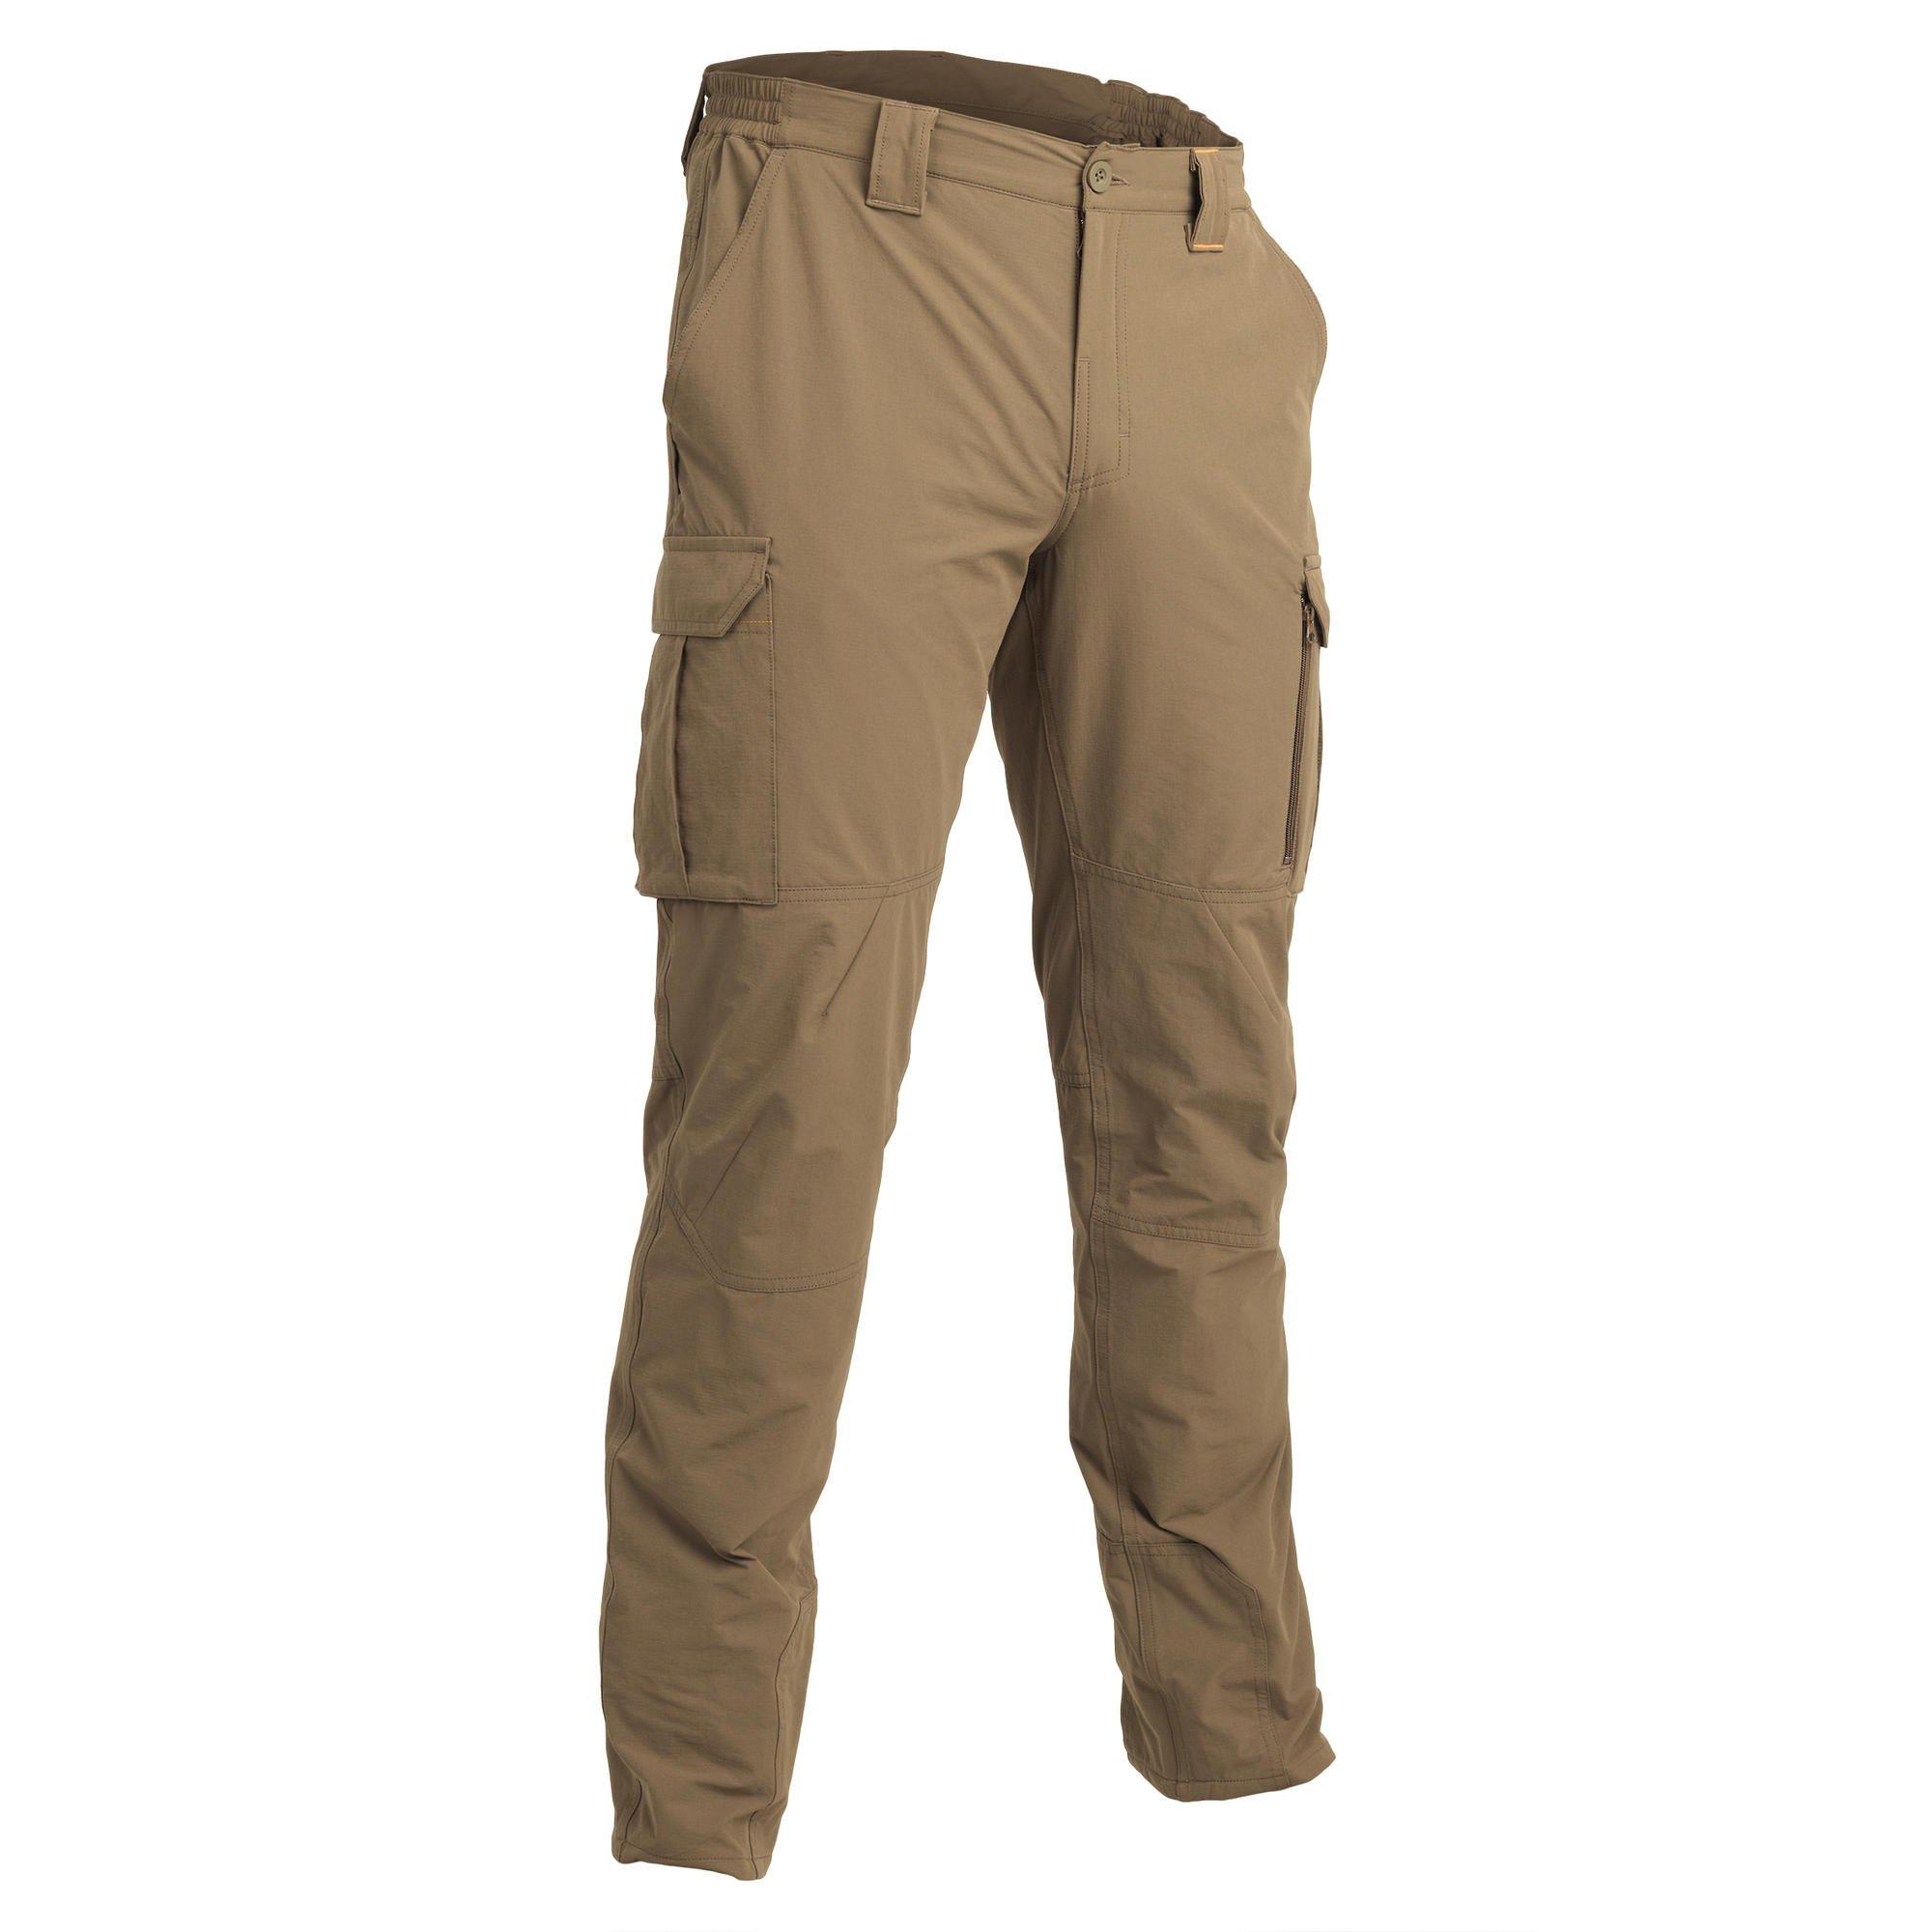 Decathlon / Trousers / Hiking Camping Trekking Trousers / Steppe 100 /  Solognac | Shopee Malaysia